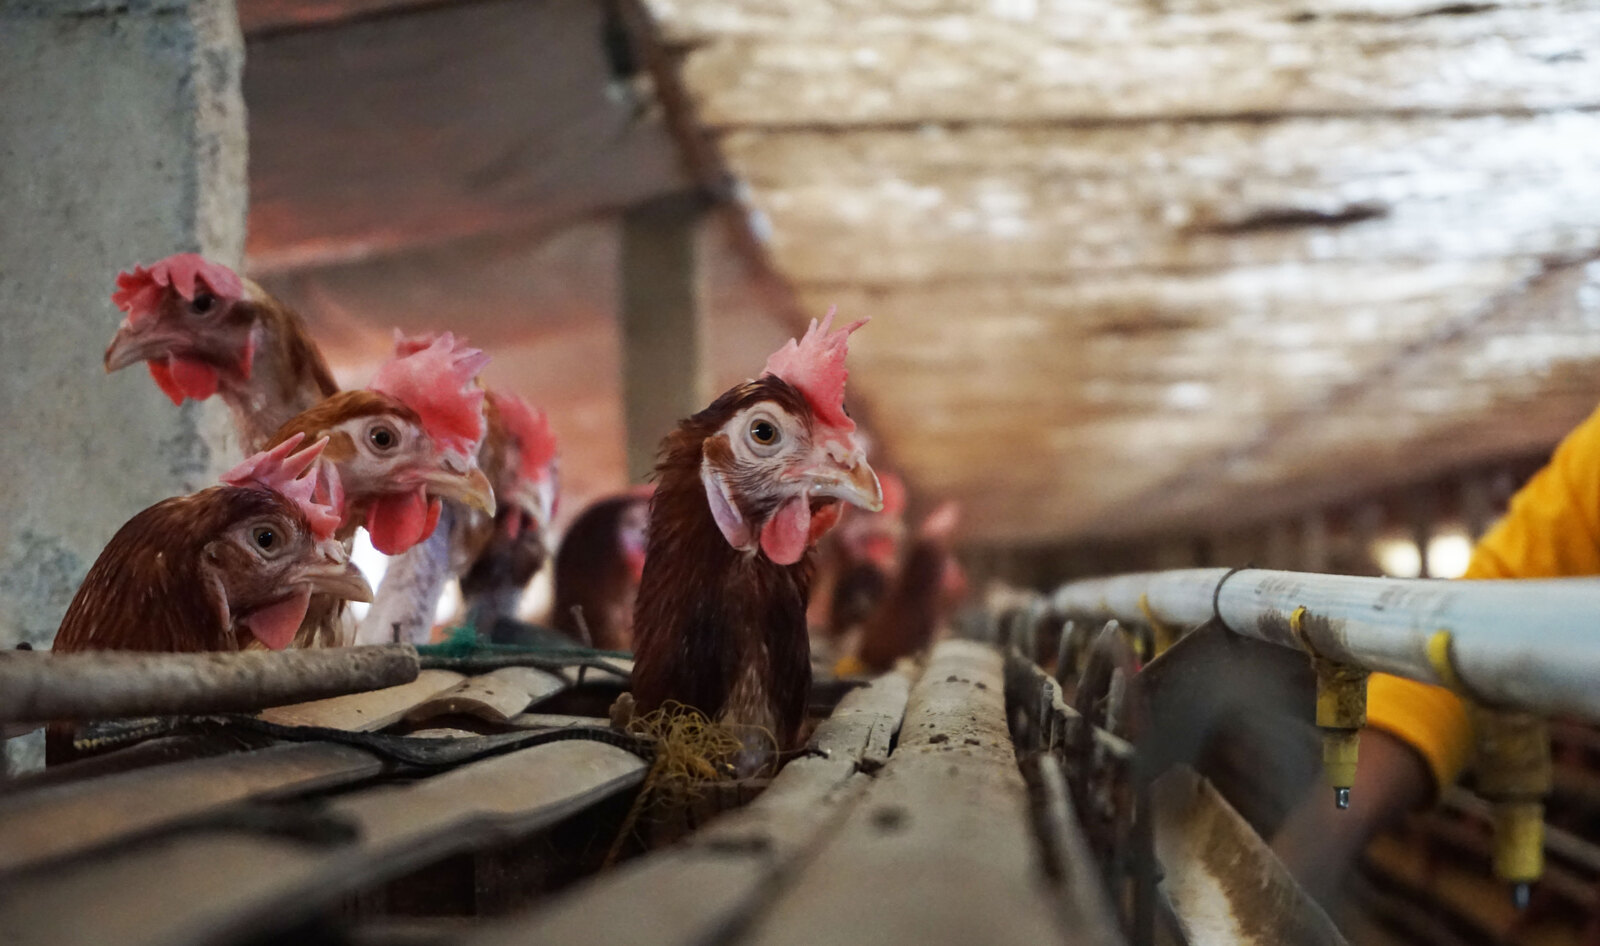 USDA Just Got Sued for Increasing Slaughter Speeds to 175 Chickens Per Minute